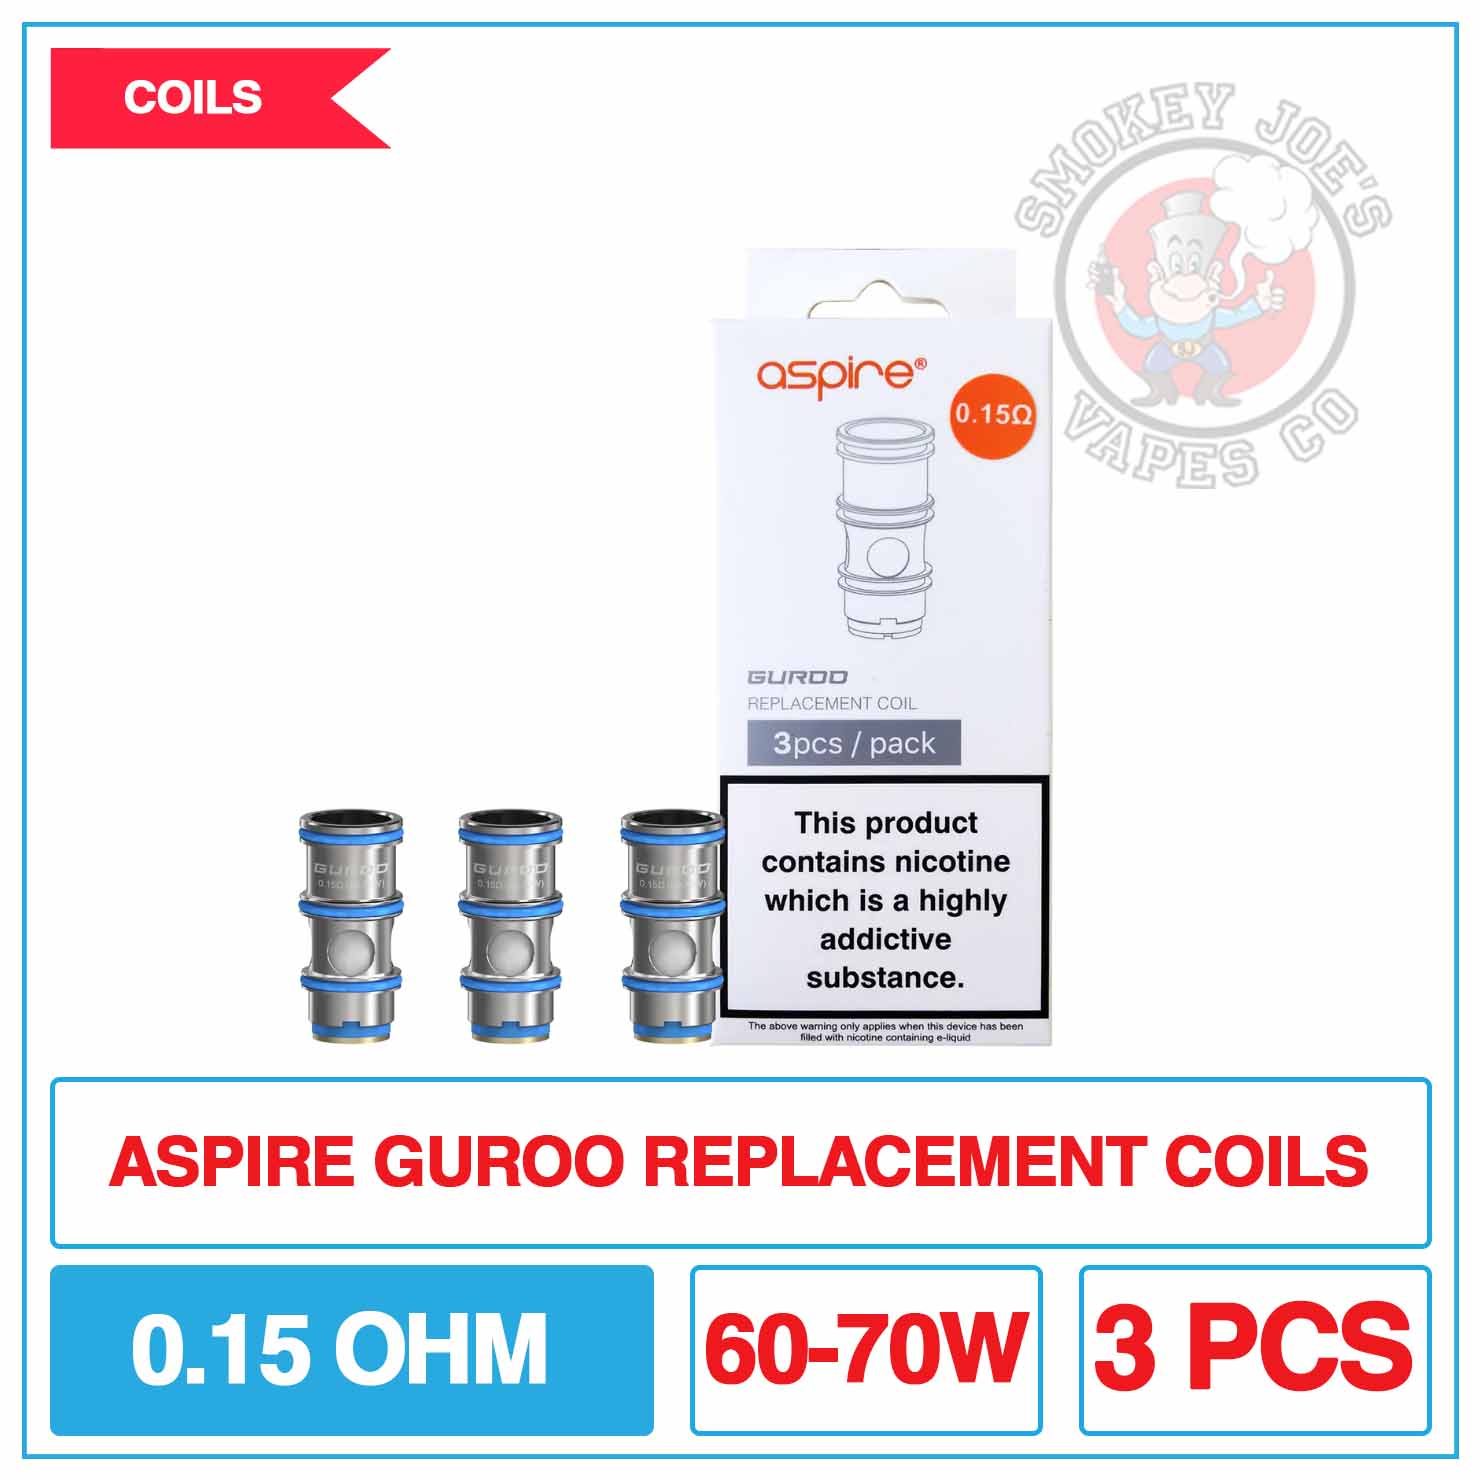 Aspire - Guroo Replacement Coils.